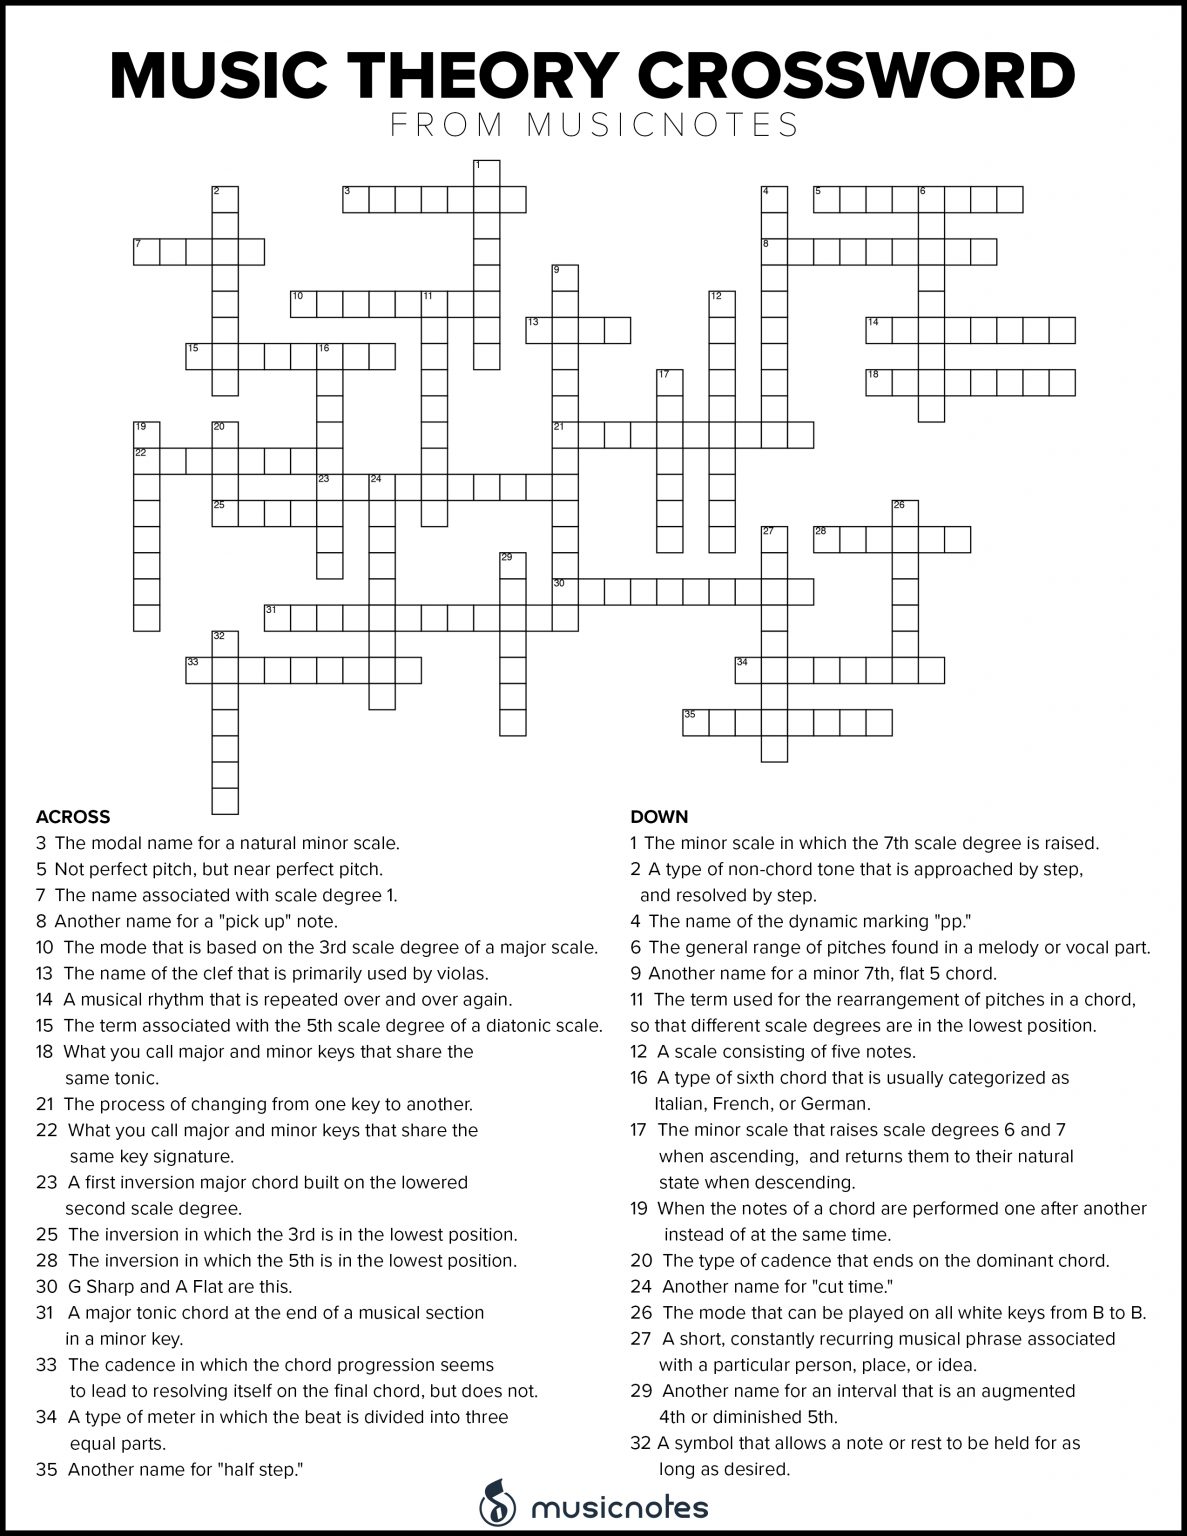 Musical Crossword Puzzles With Free Printables! — Musicnotes Now | Word